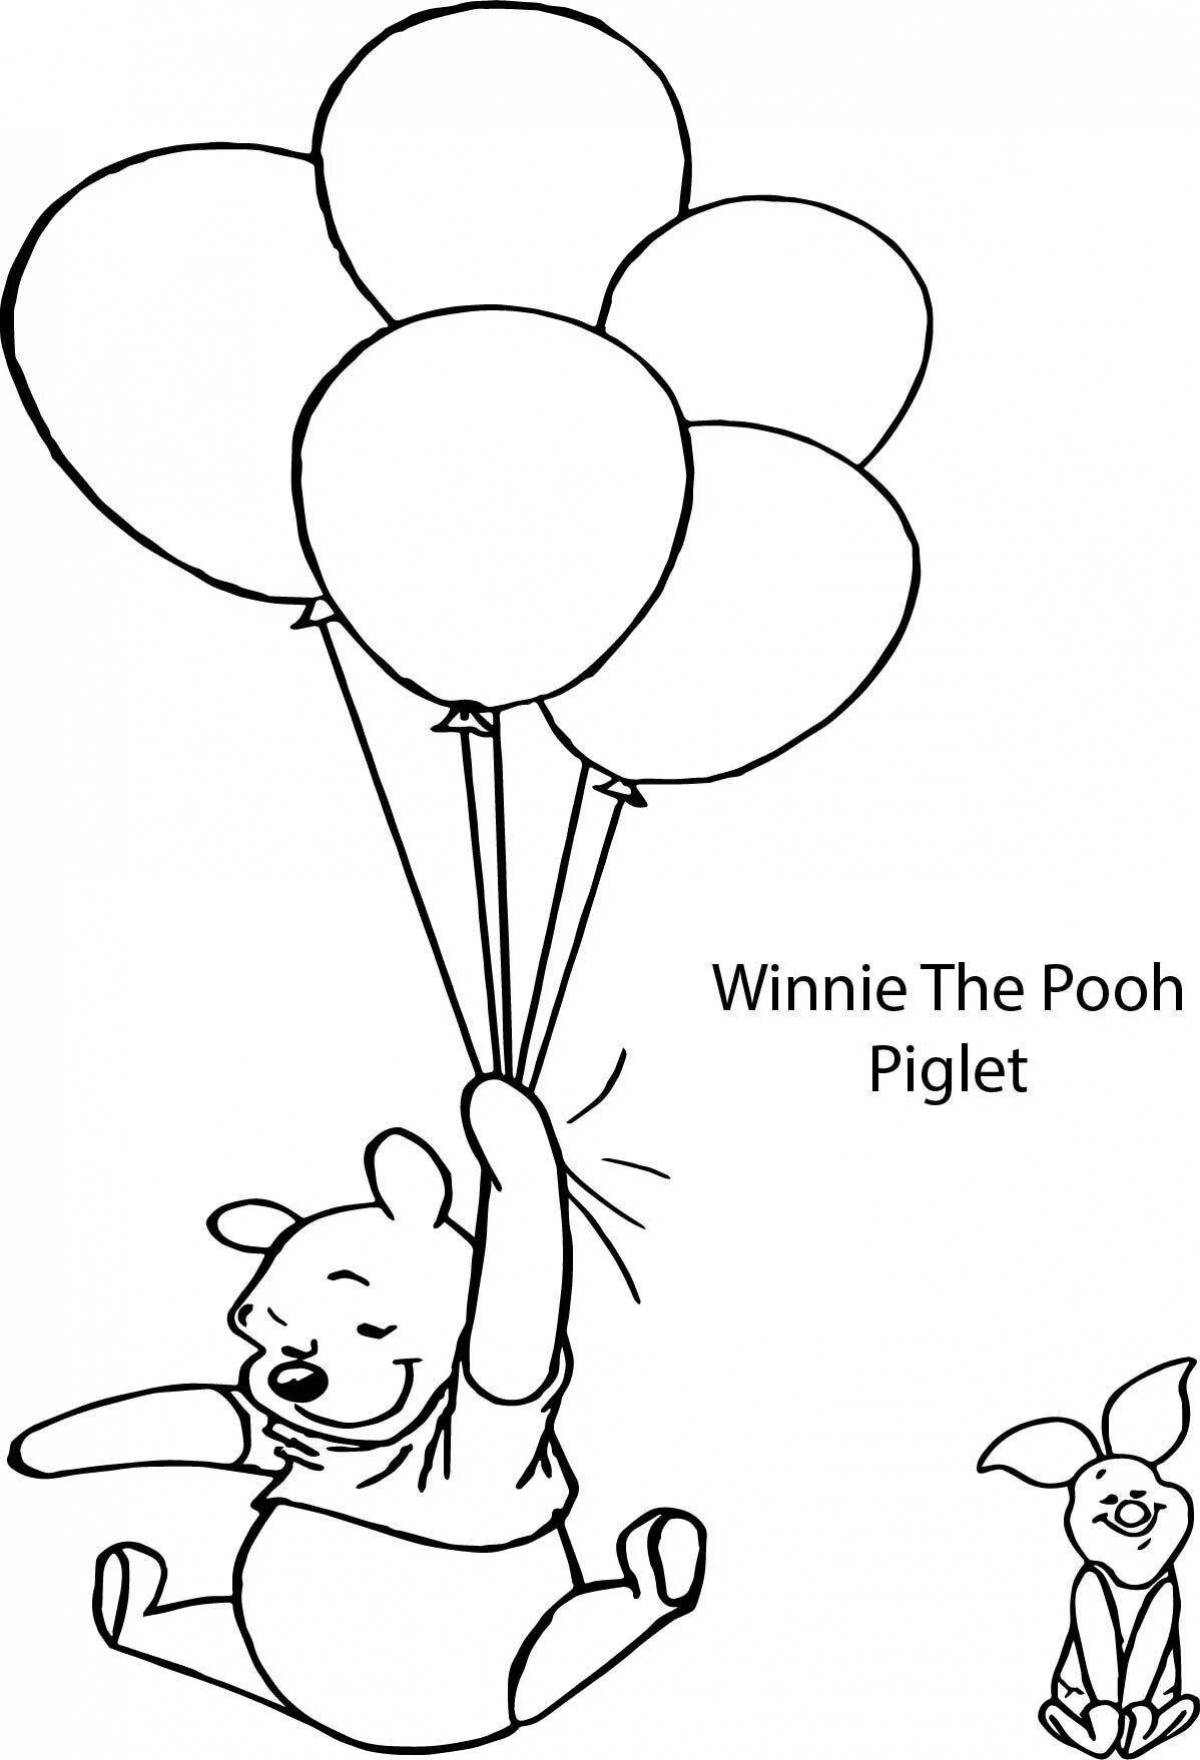 Bright bear with balloons